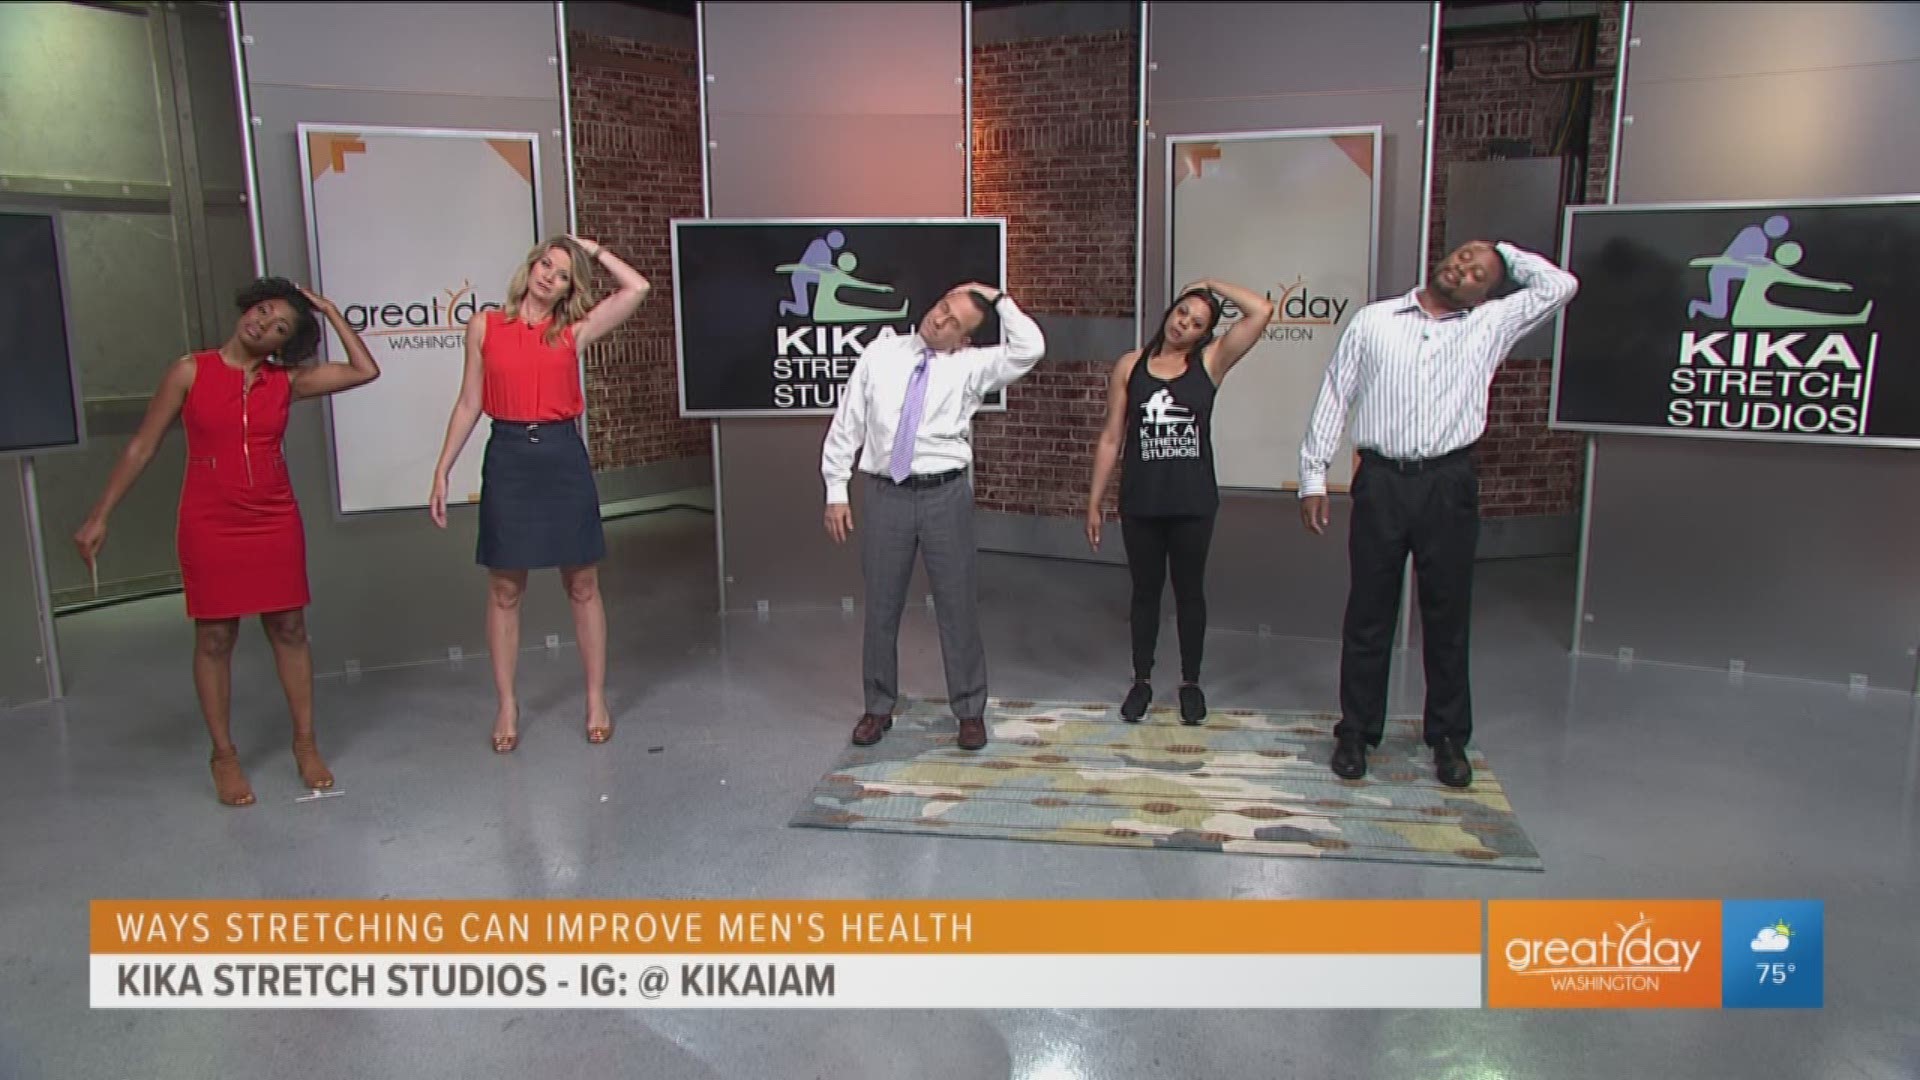 Ashlee Wood of Kika Stretch Studios stops by to show how stretching can go a long way to promoting good health.  Follow them on Instagram @kikaiam